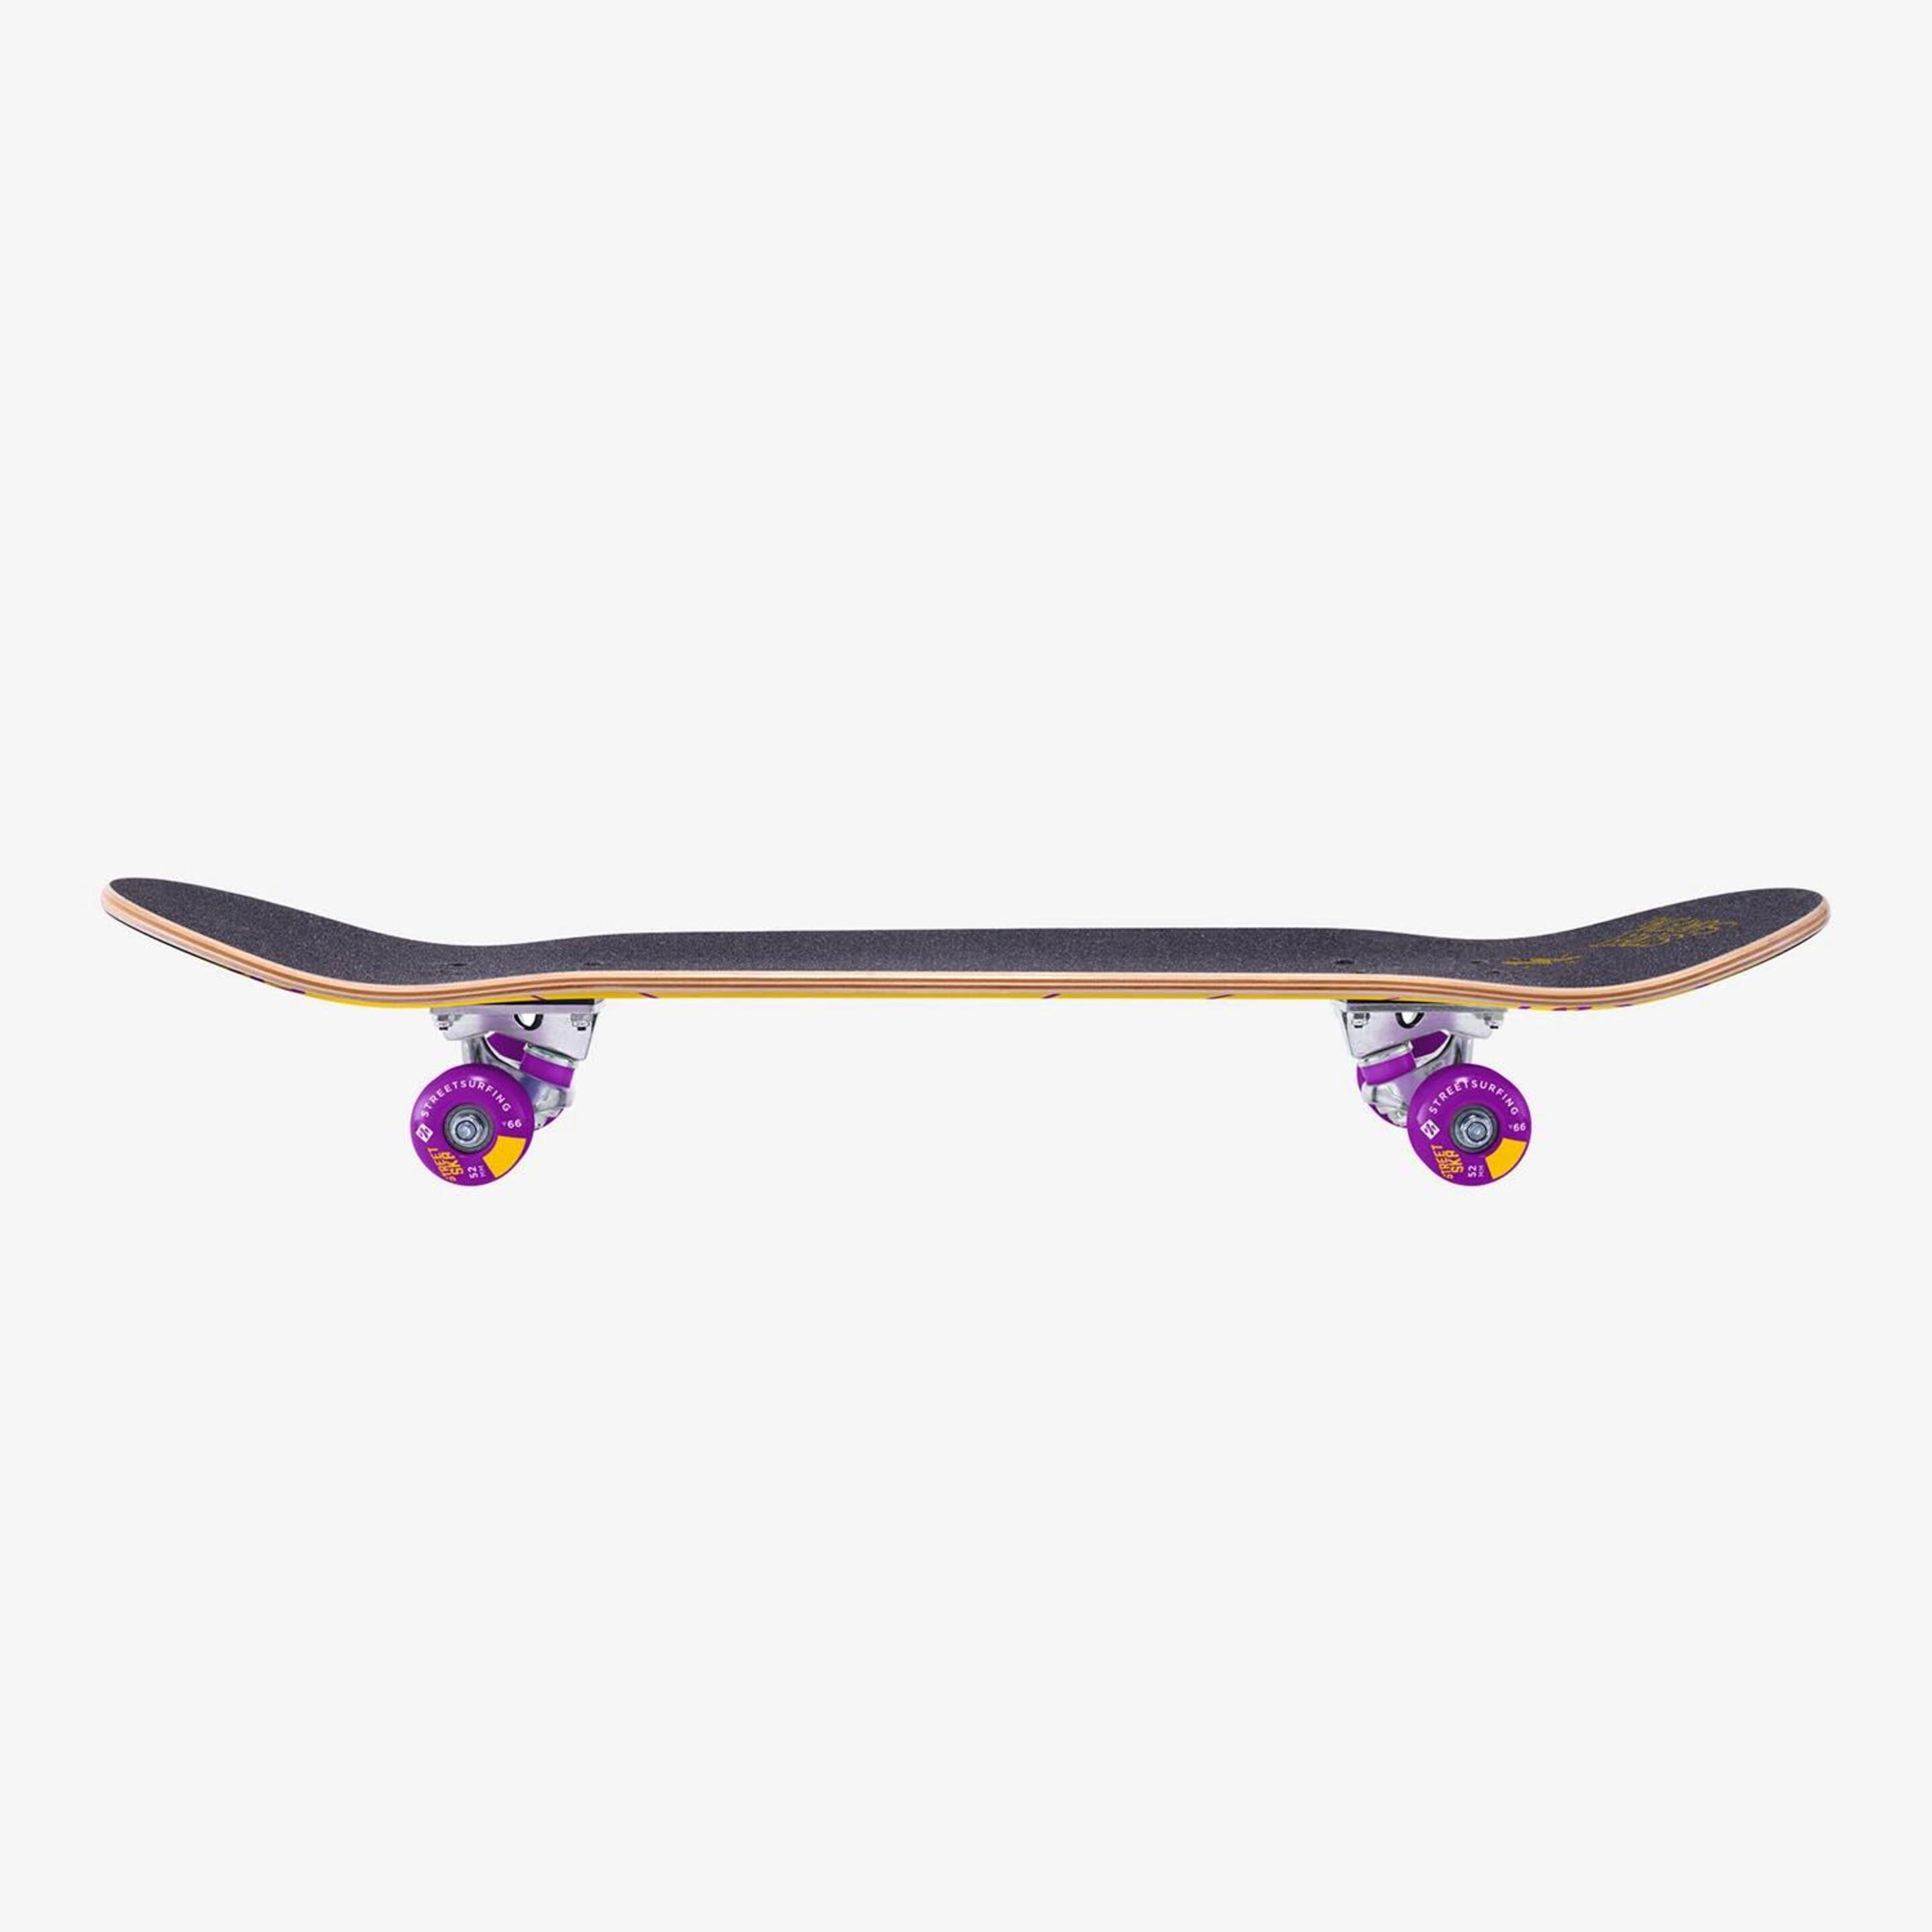 Tabla Skate Streetsurfing Shout Out 31"